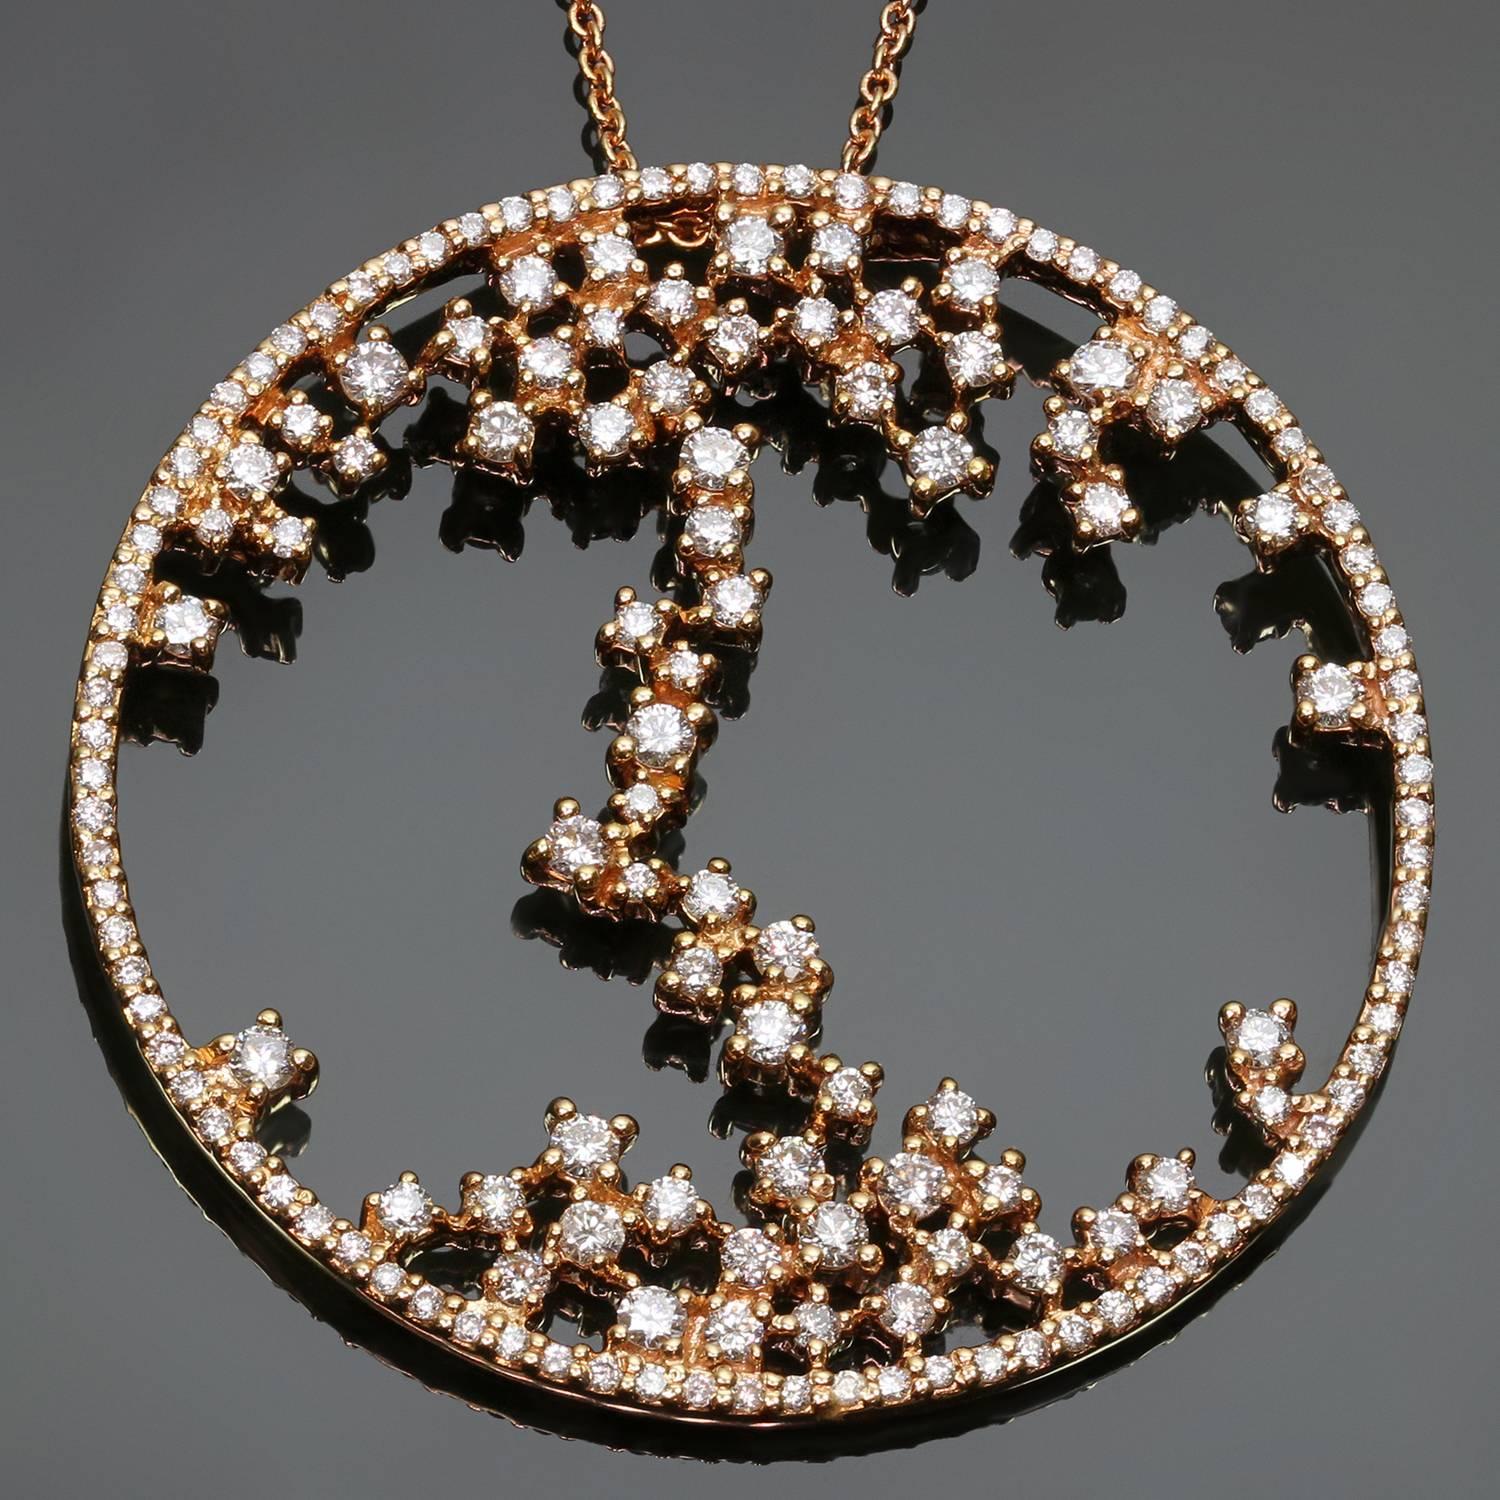 This elegant contemporary necklace is crafted in 18k rose gold and features a striking round pendant accented with about 162 round diamonds of an estimated 1.60 carats. Made in United States circa 2010s. Measurements: 1.53